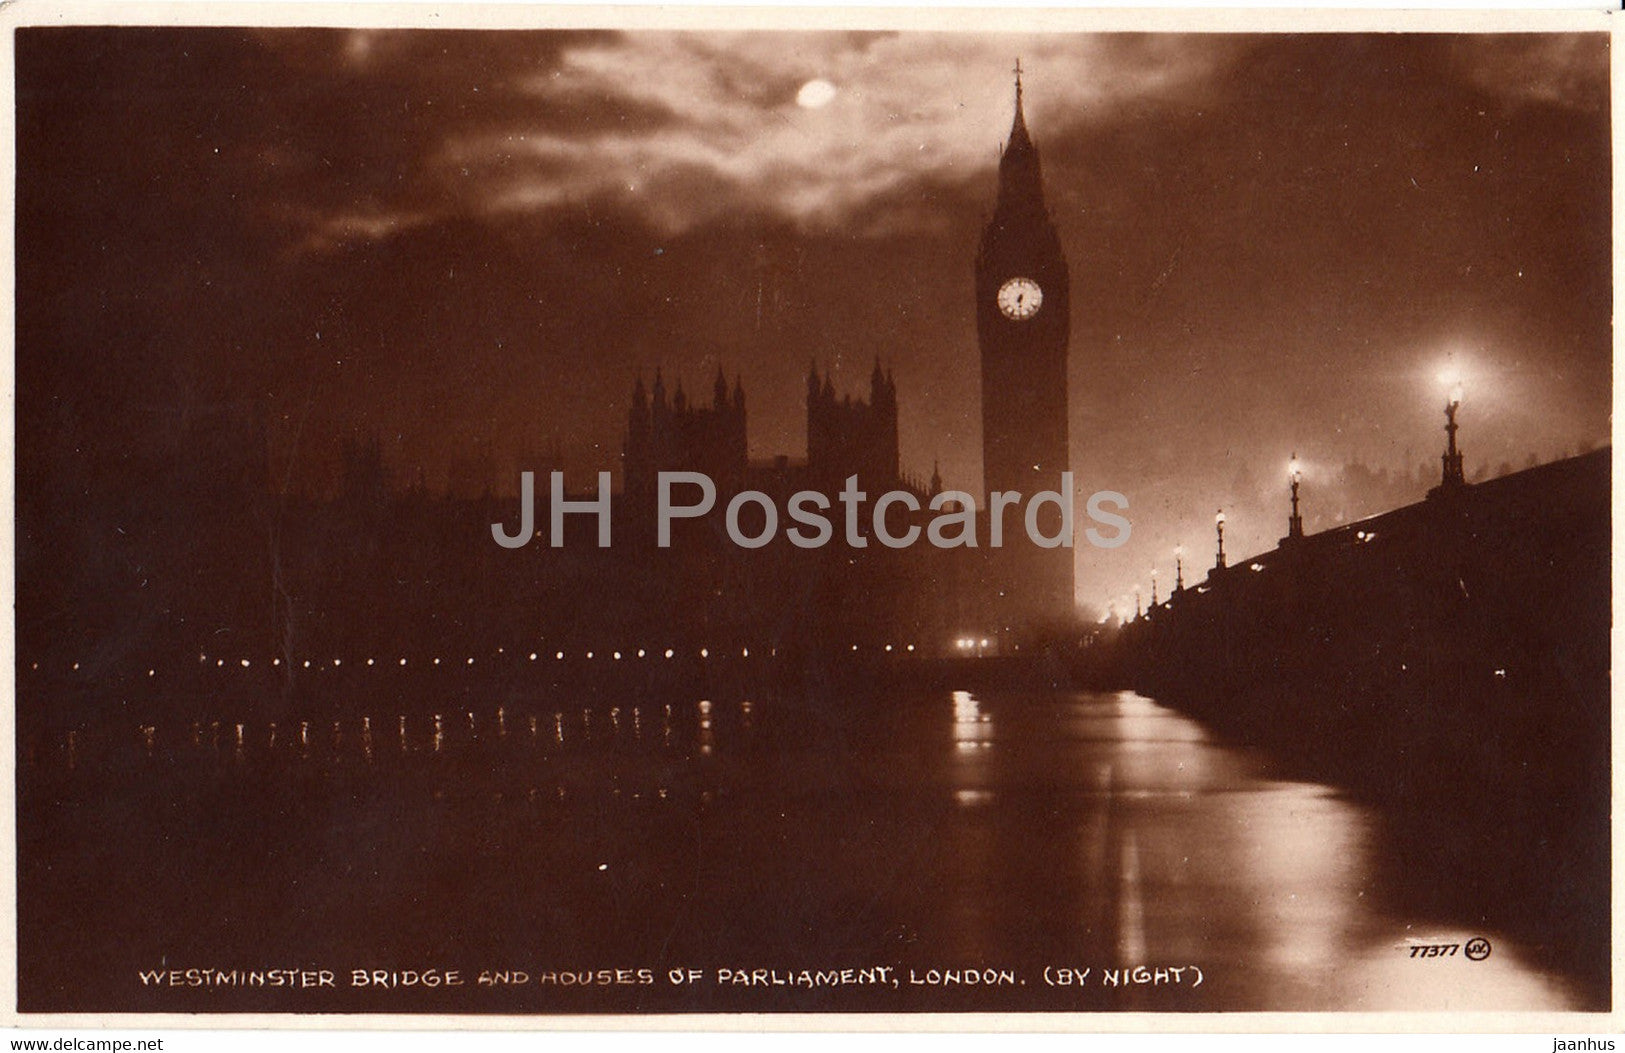 London - Westminster Bridge and Houses of Parliament by Night - old postcard - England - United Kingdom - unused - JH Postcards